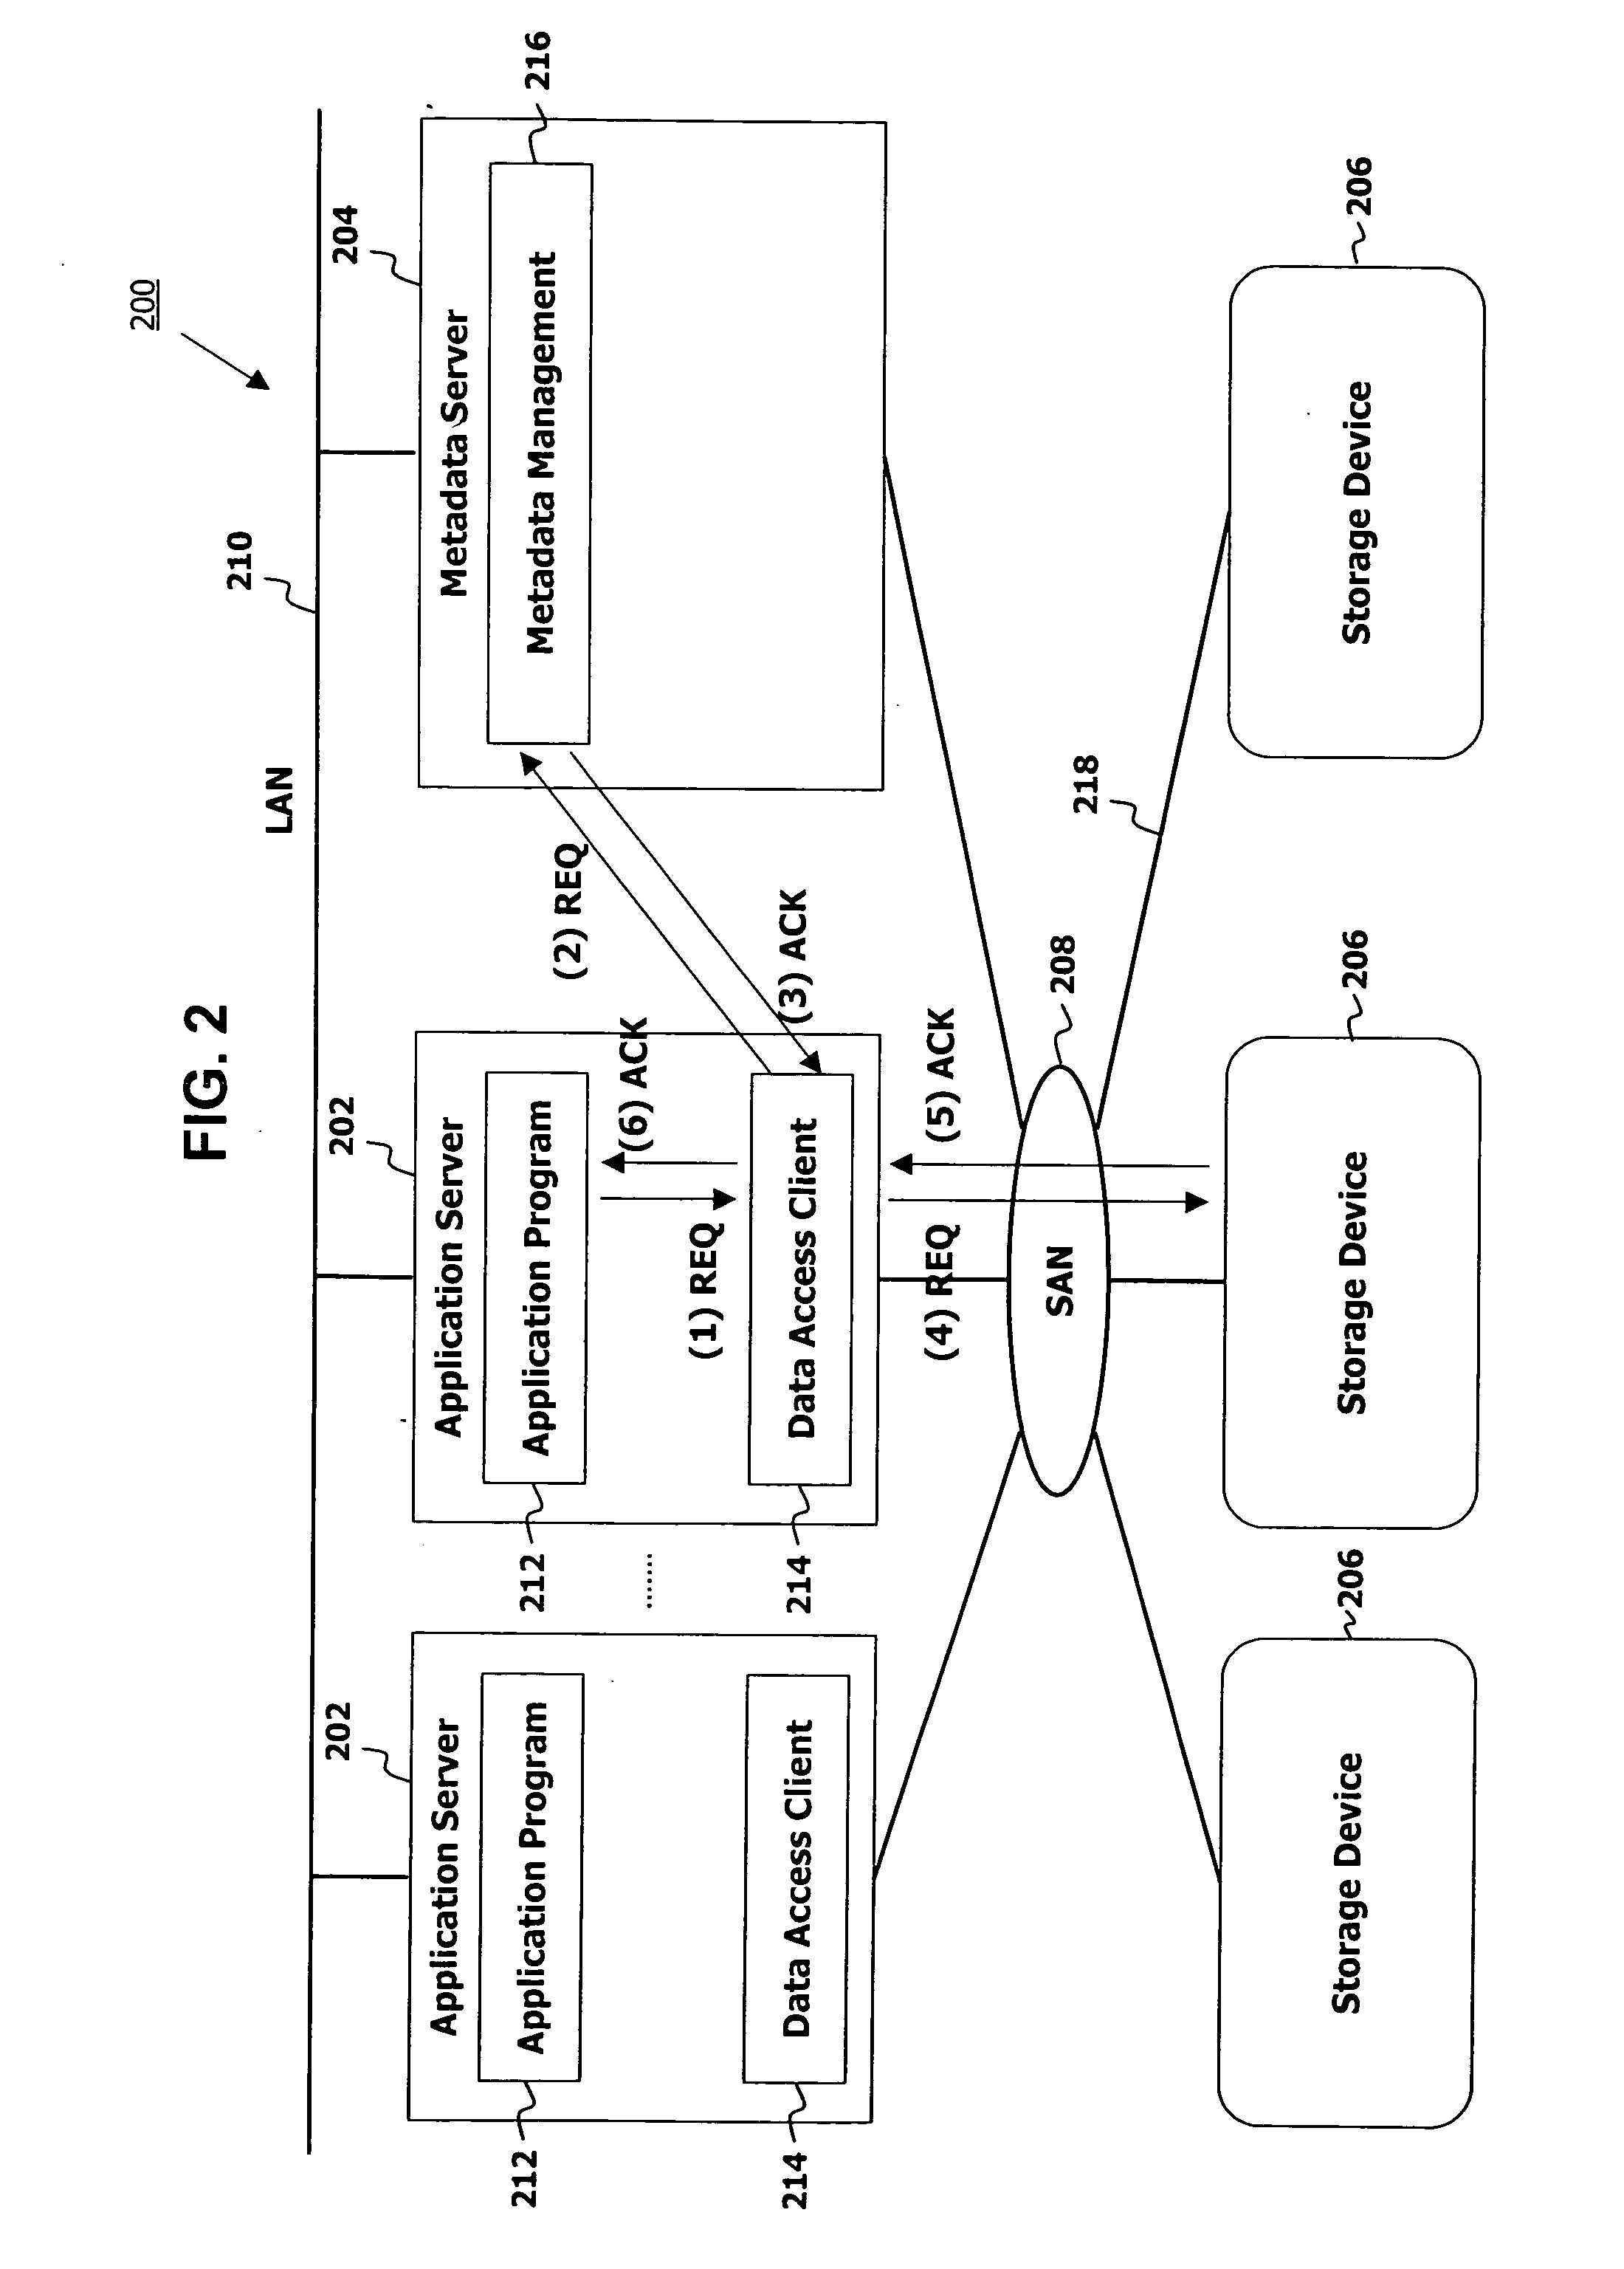 Method and apparatus of hierarchical storage management based on data value